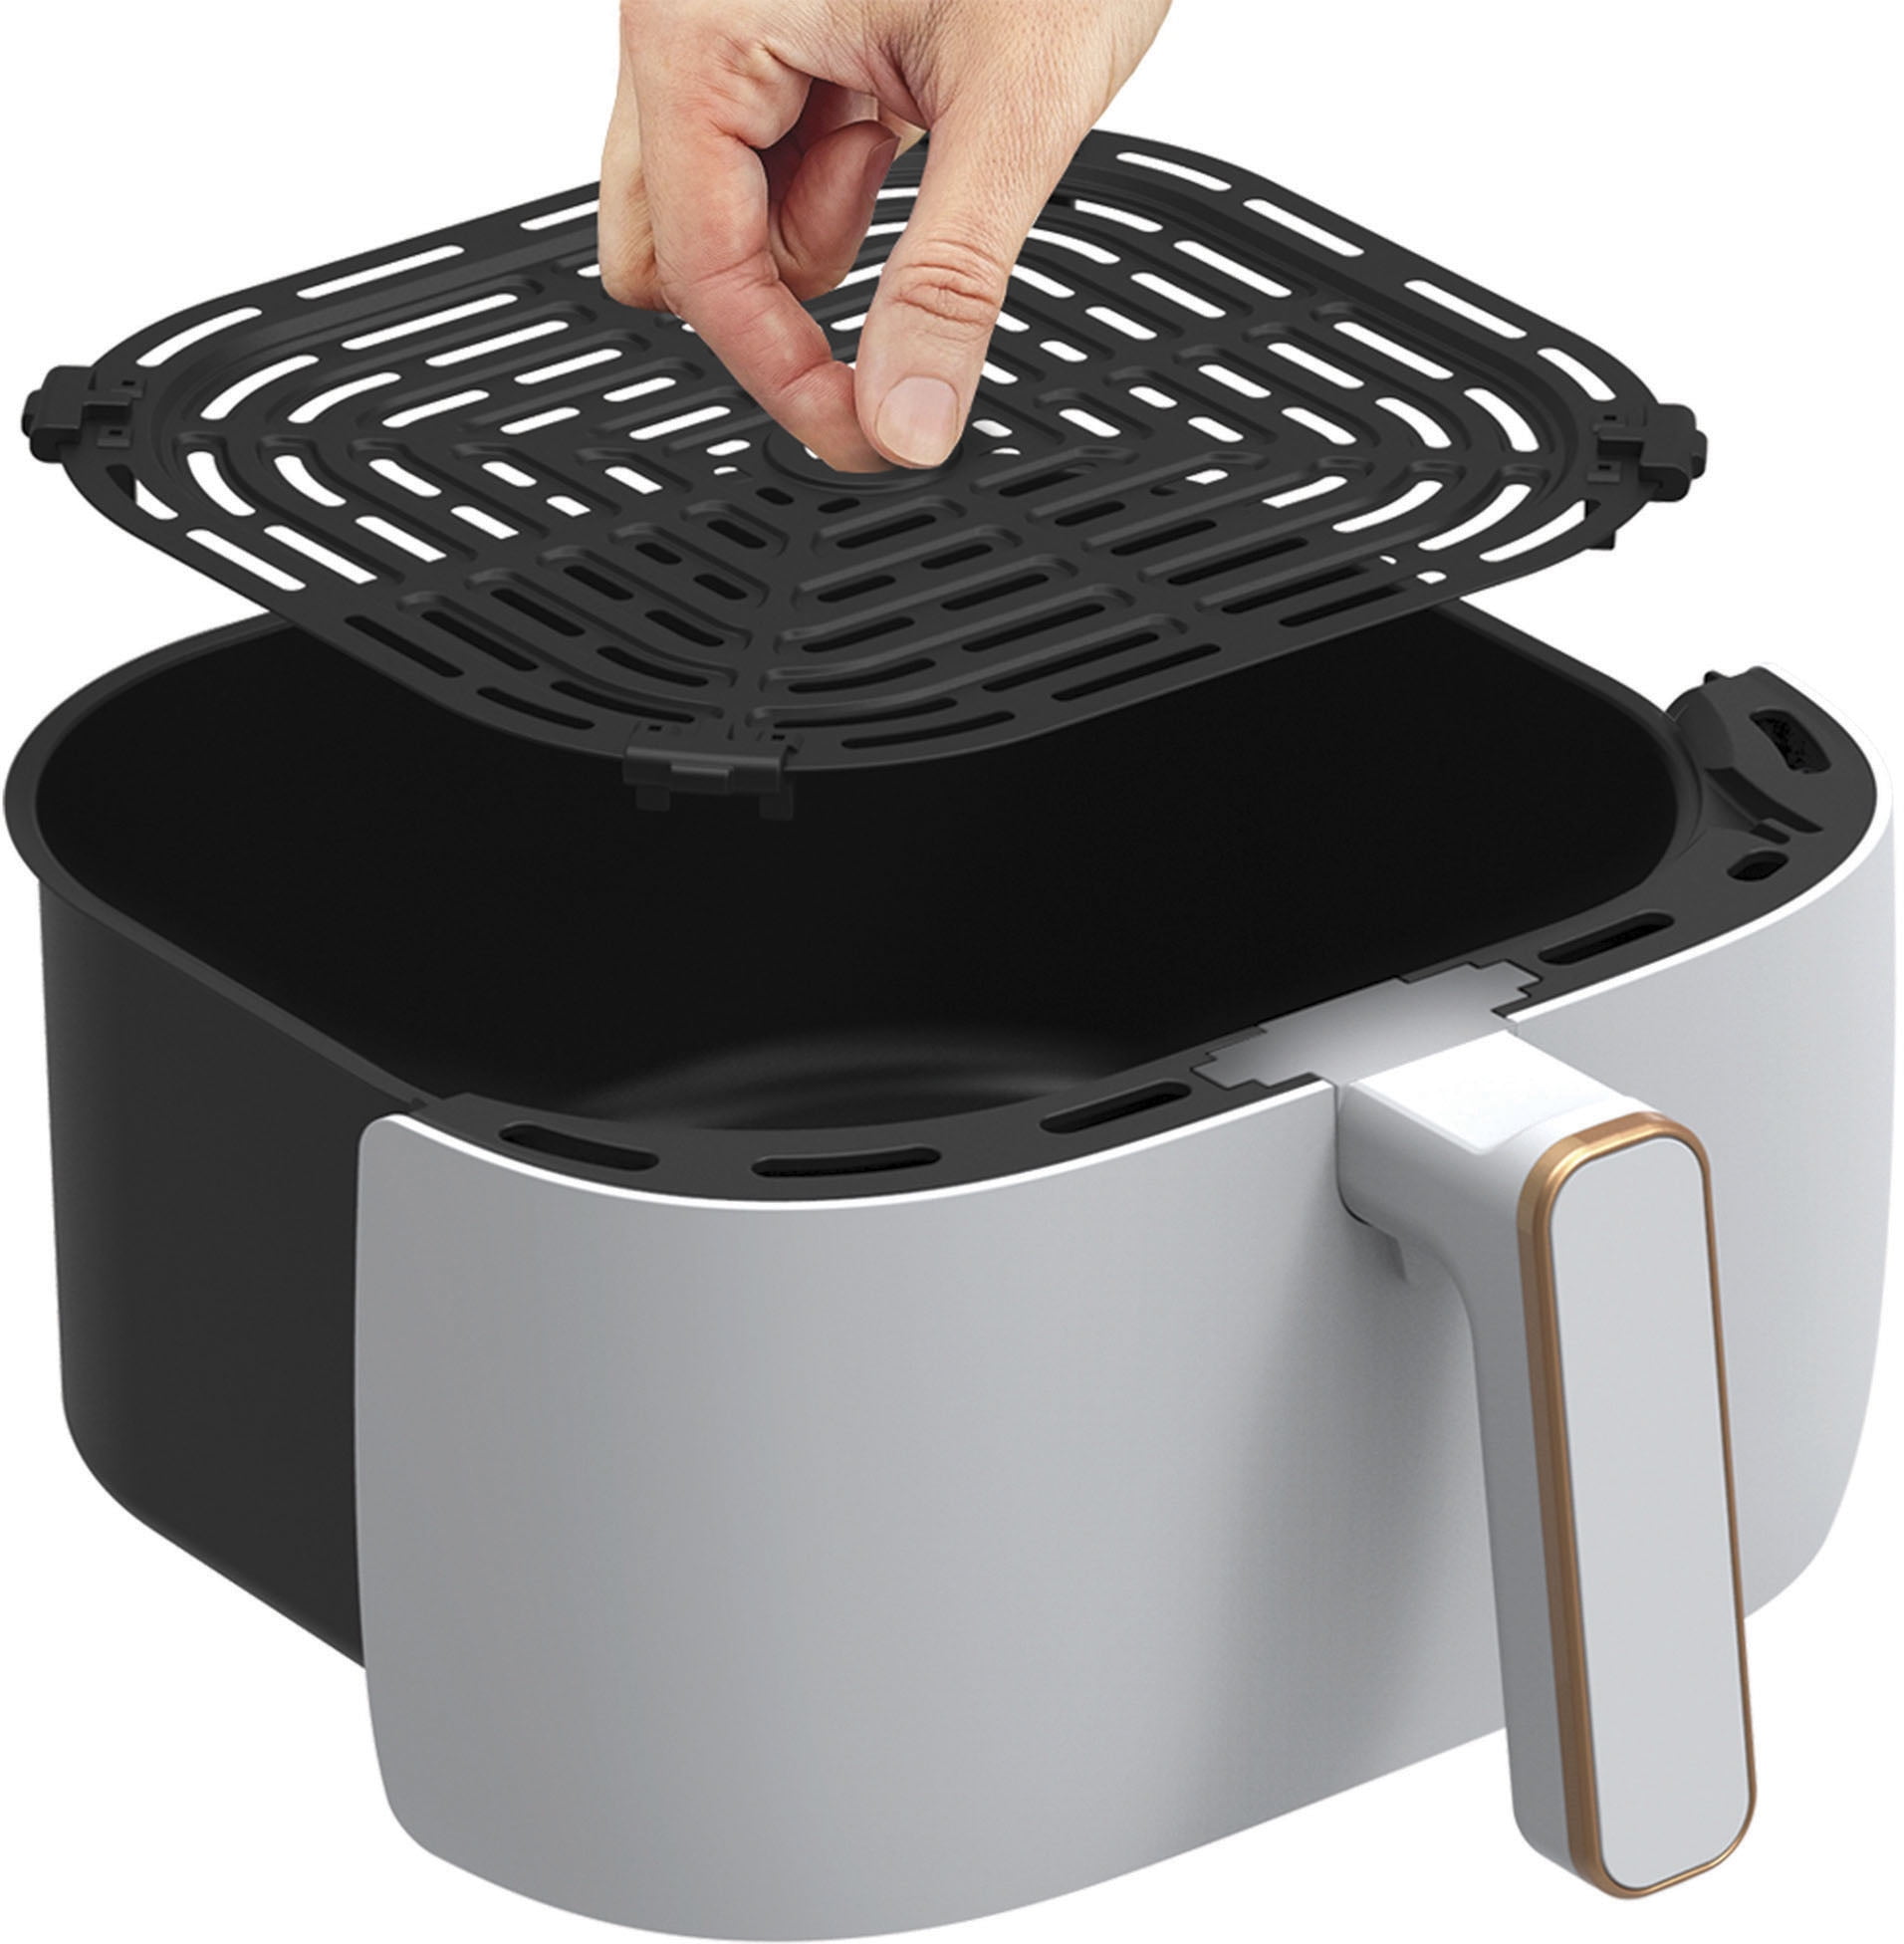 Bella's Pro Series 6-qt. air fryer also bakes and roasts, now 50